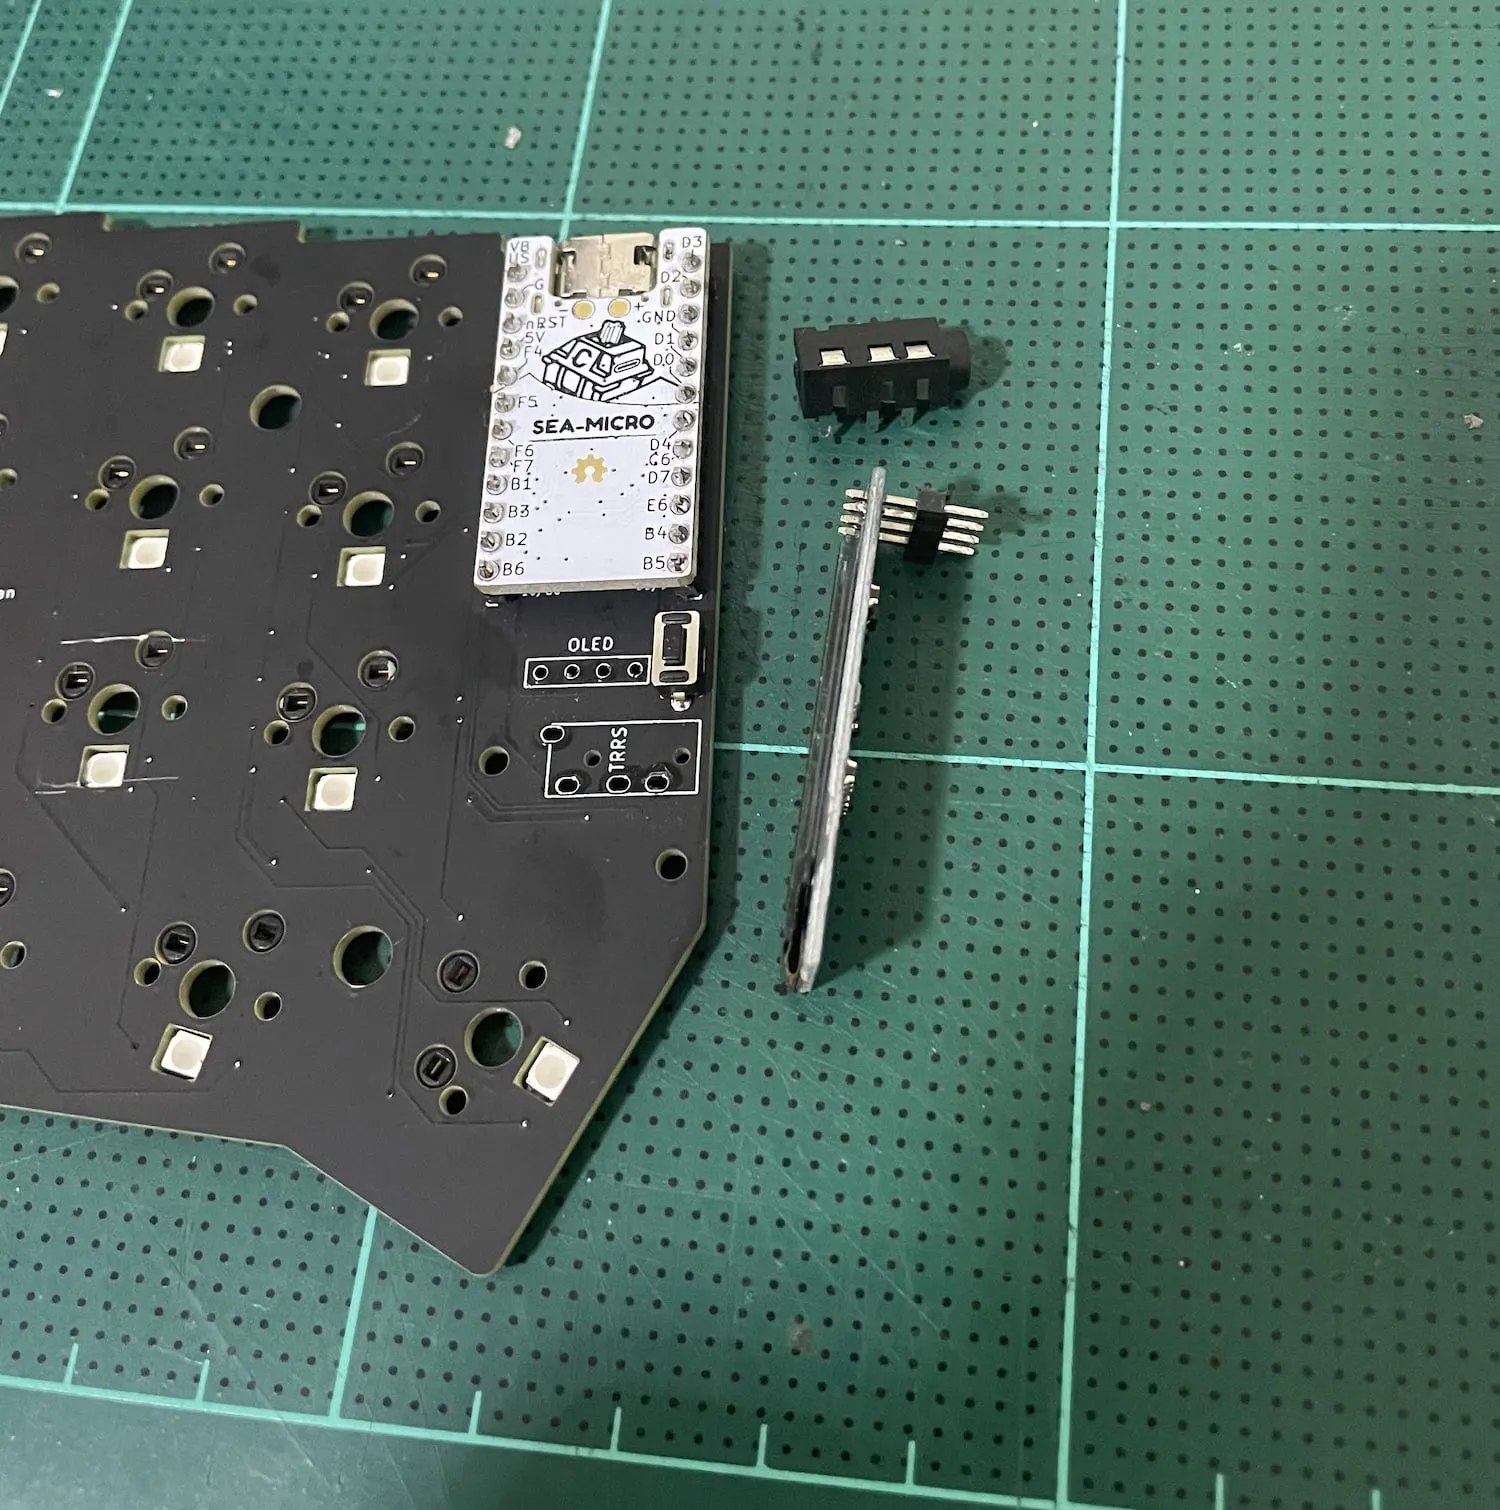 The OLED screen and TRRS Jack removed from the board